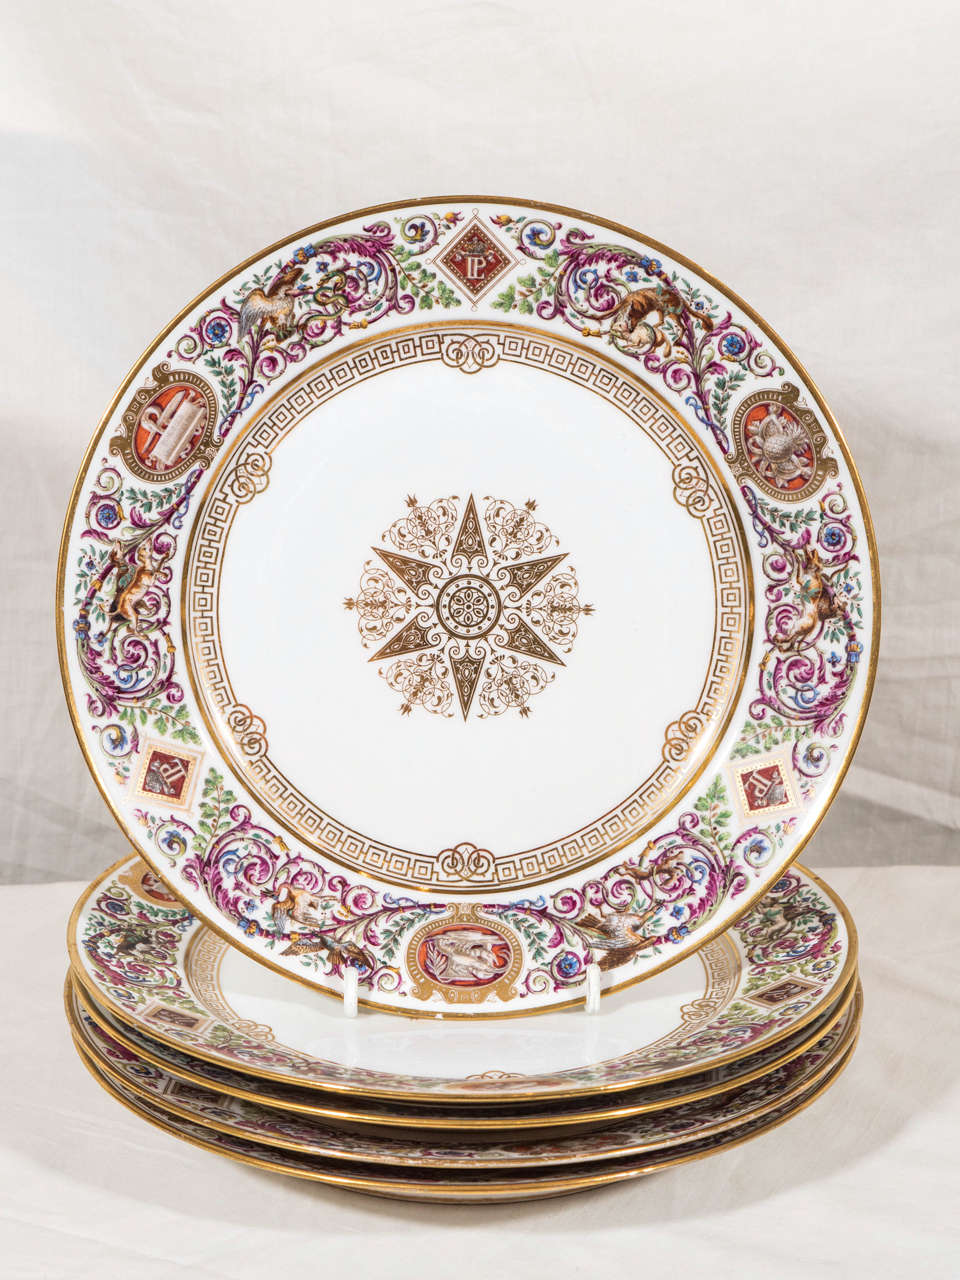 A set of Sèvres dishes after the 